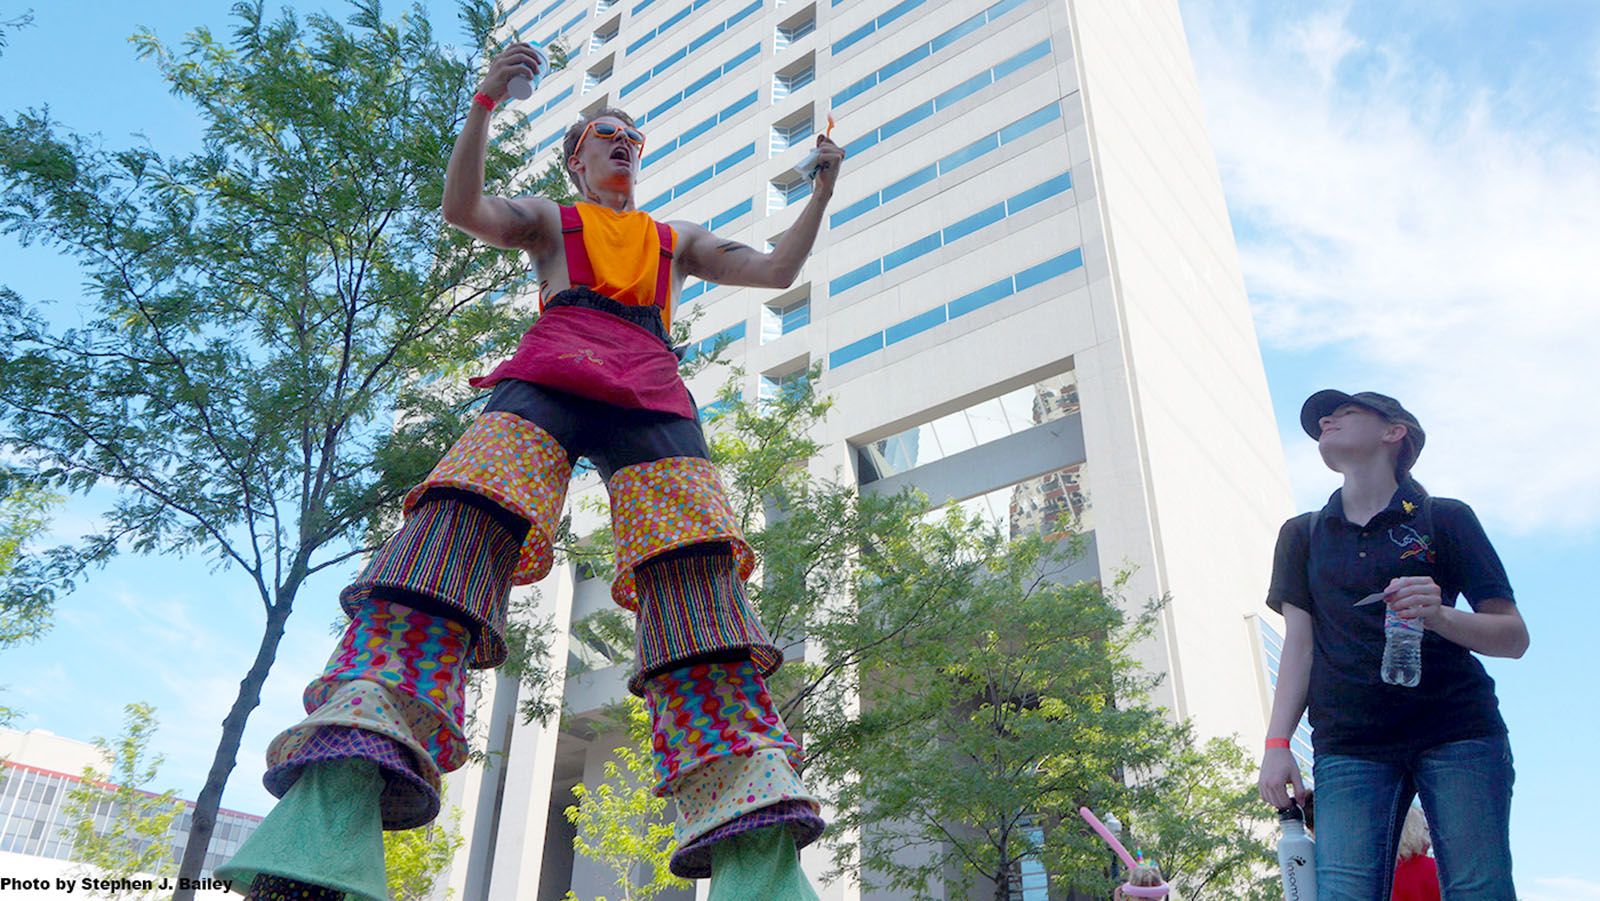 Stilt walkers will entertain throughout the day during BuskerFest on Saturday, May 18, in downtown Fort Wayne.